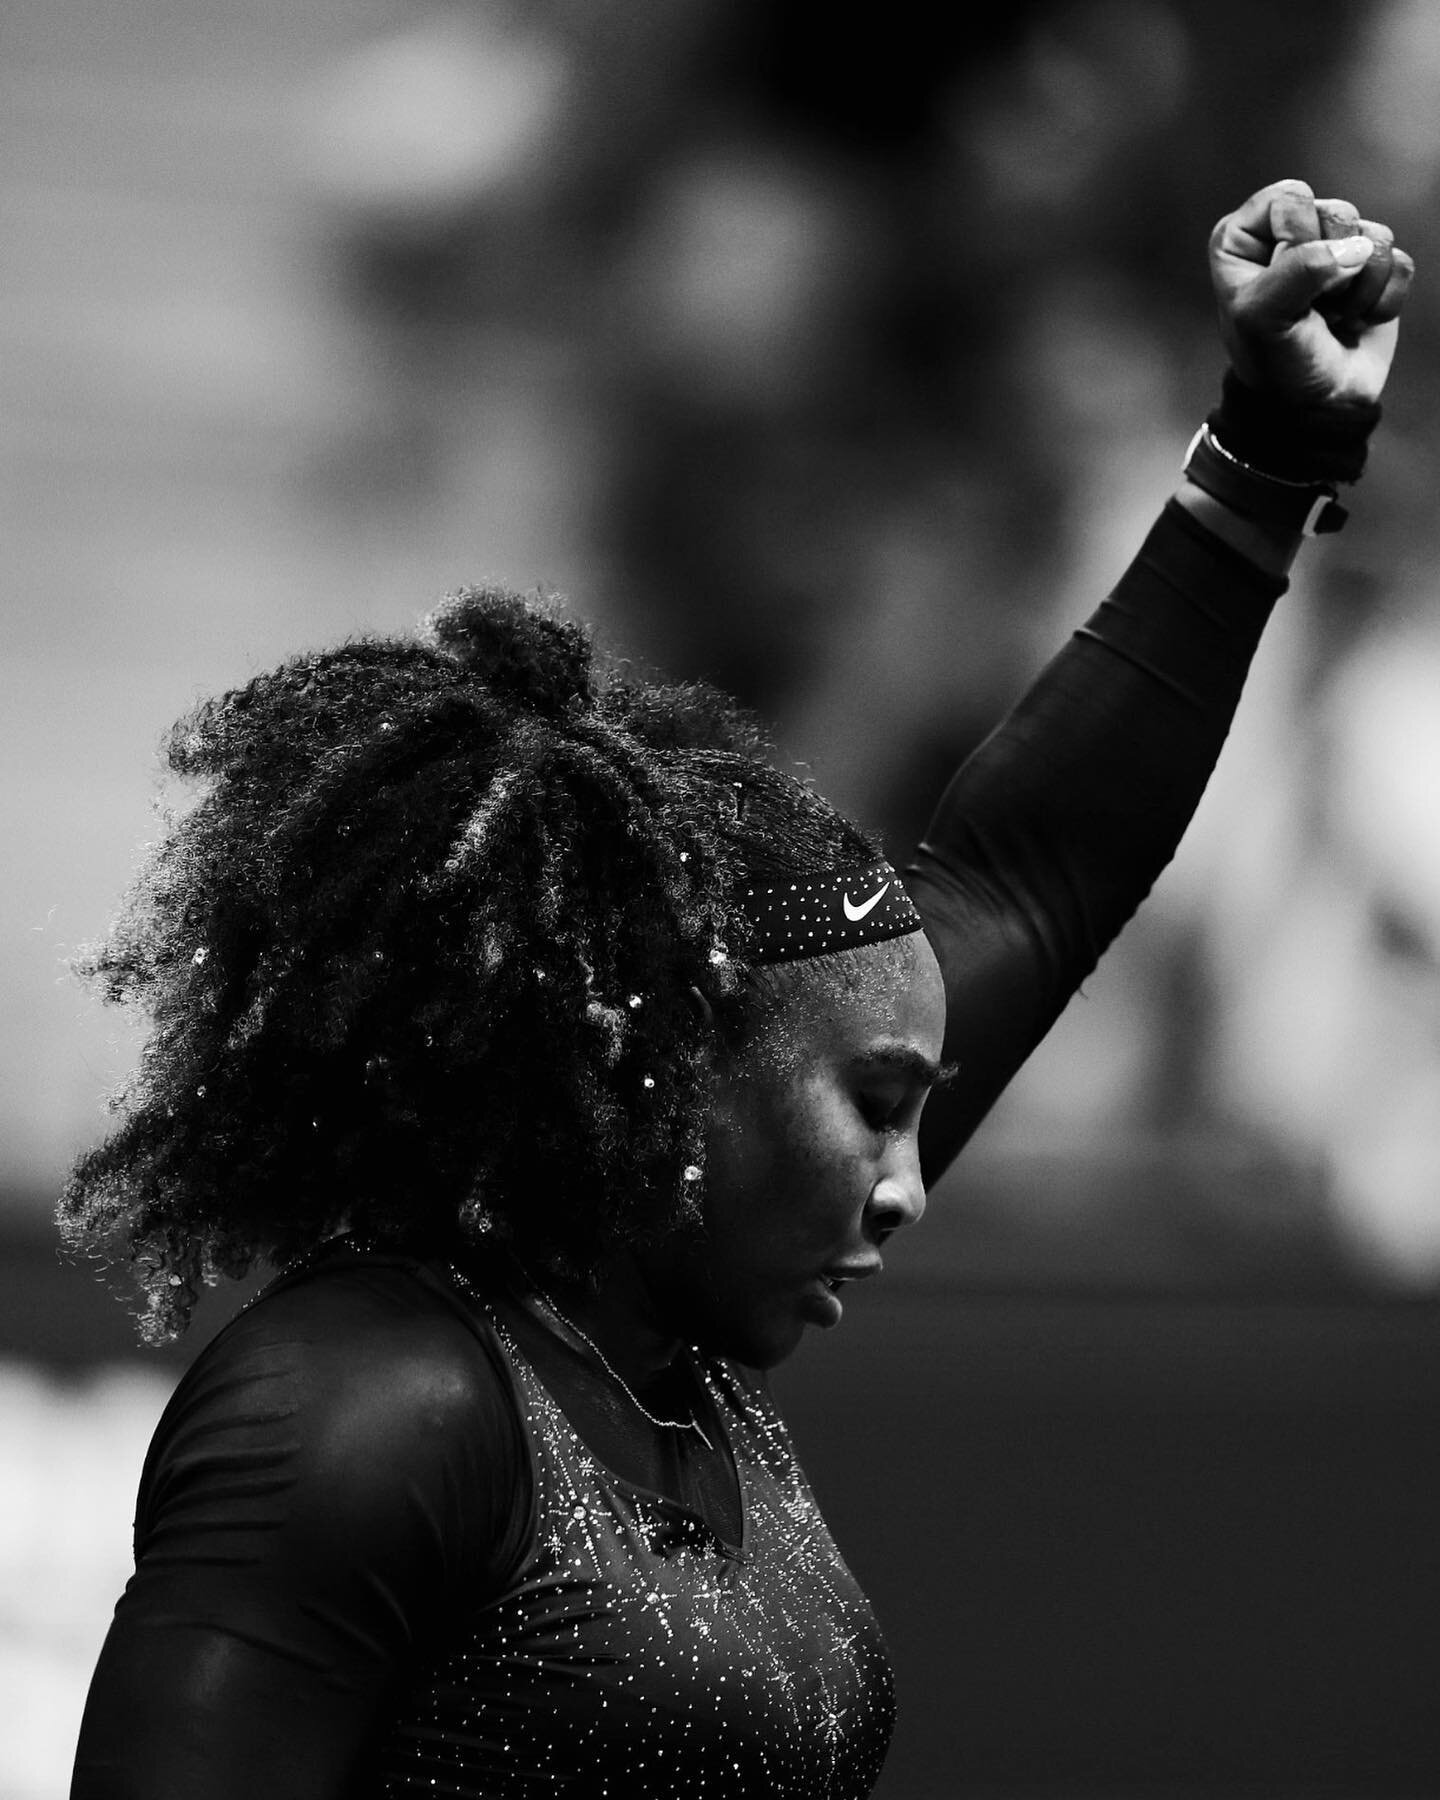 Win or lose you are still the #goat !! 
💖🔥💯🎾🎾🏆🏆
Thank you for all you have done to come from Compton to the world stage with such grace, talent and style. What you have done to raise the stature and confidence of young Black girls and women is